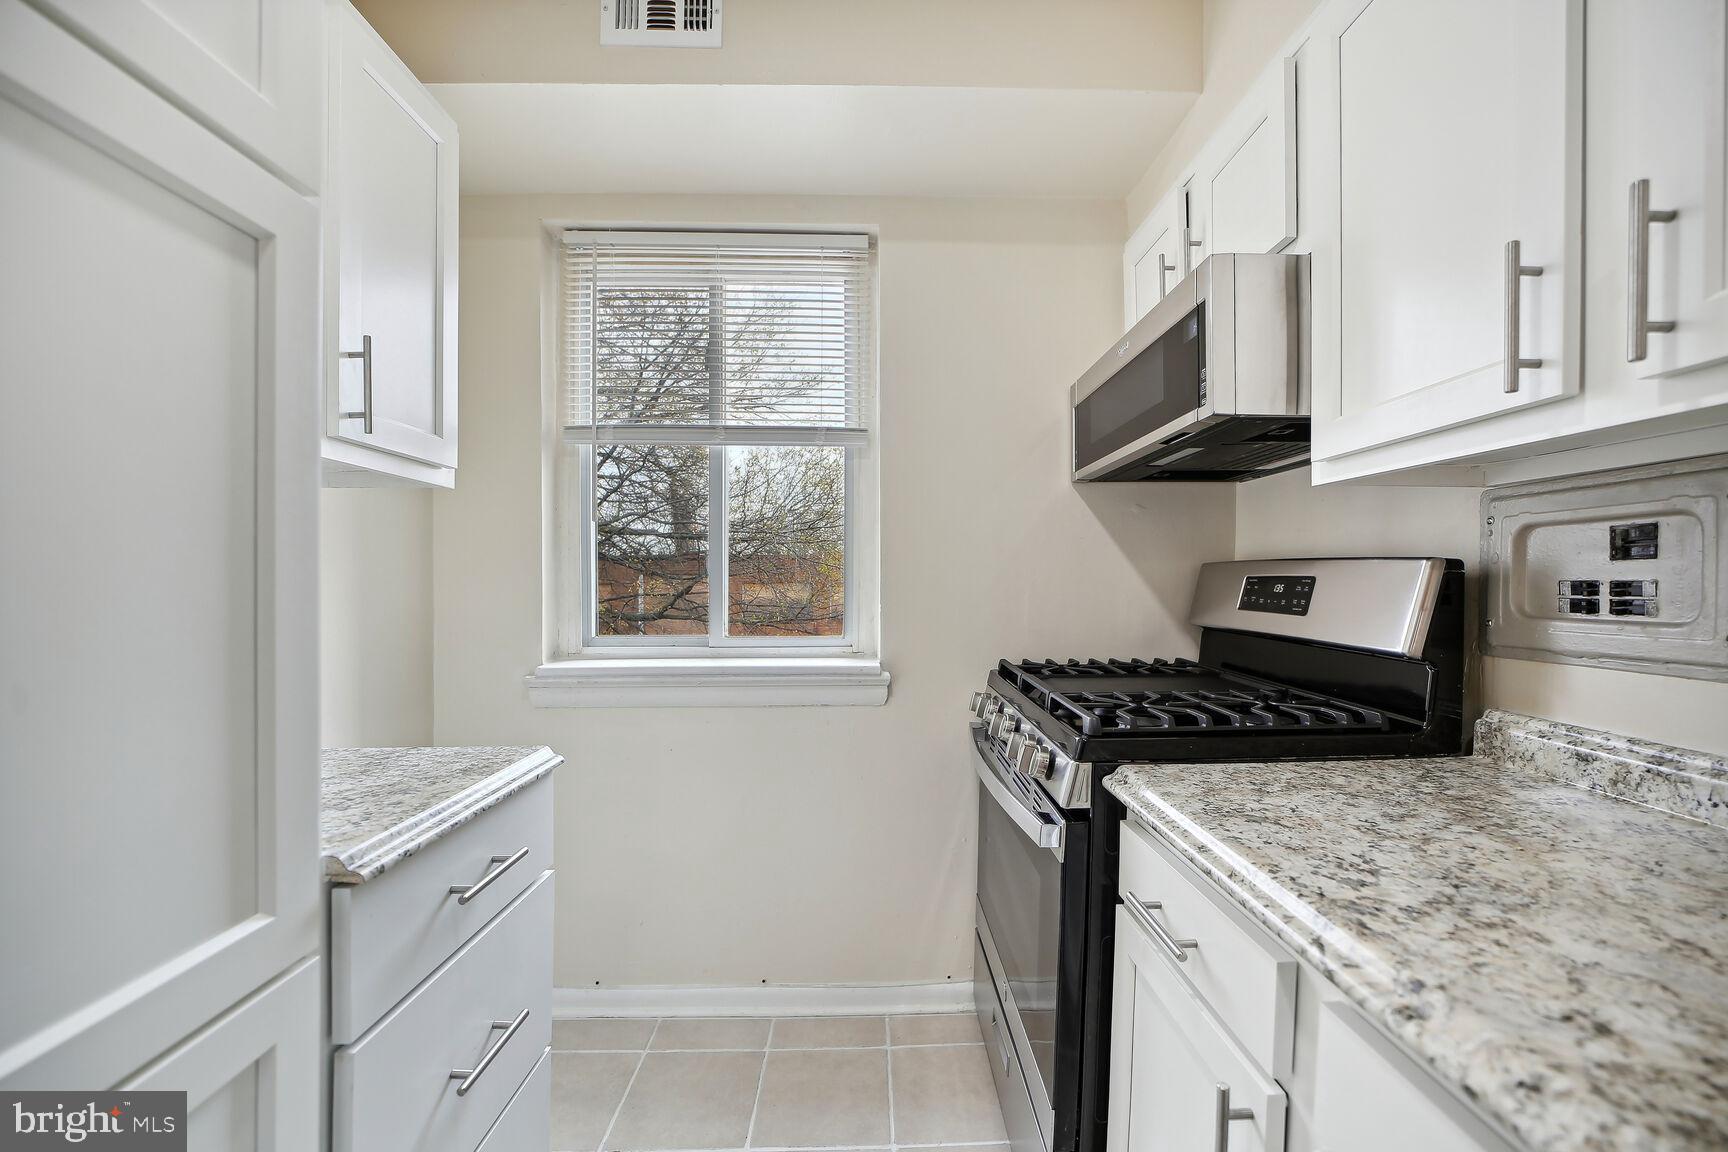 a kitchen with cabinets appliances and a window